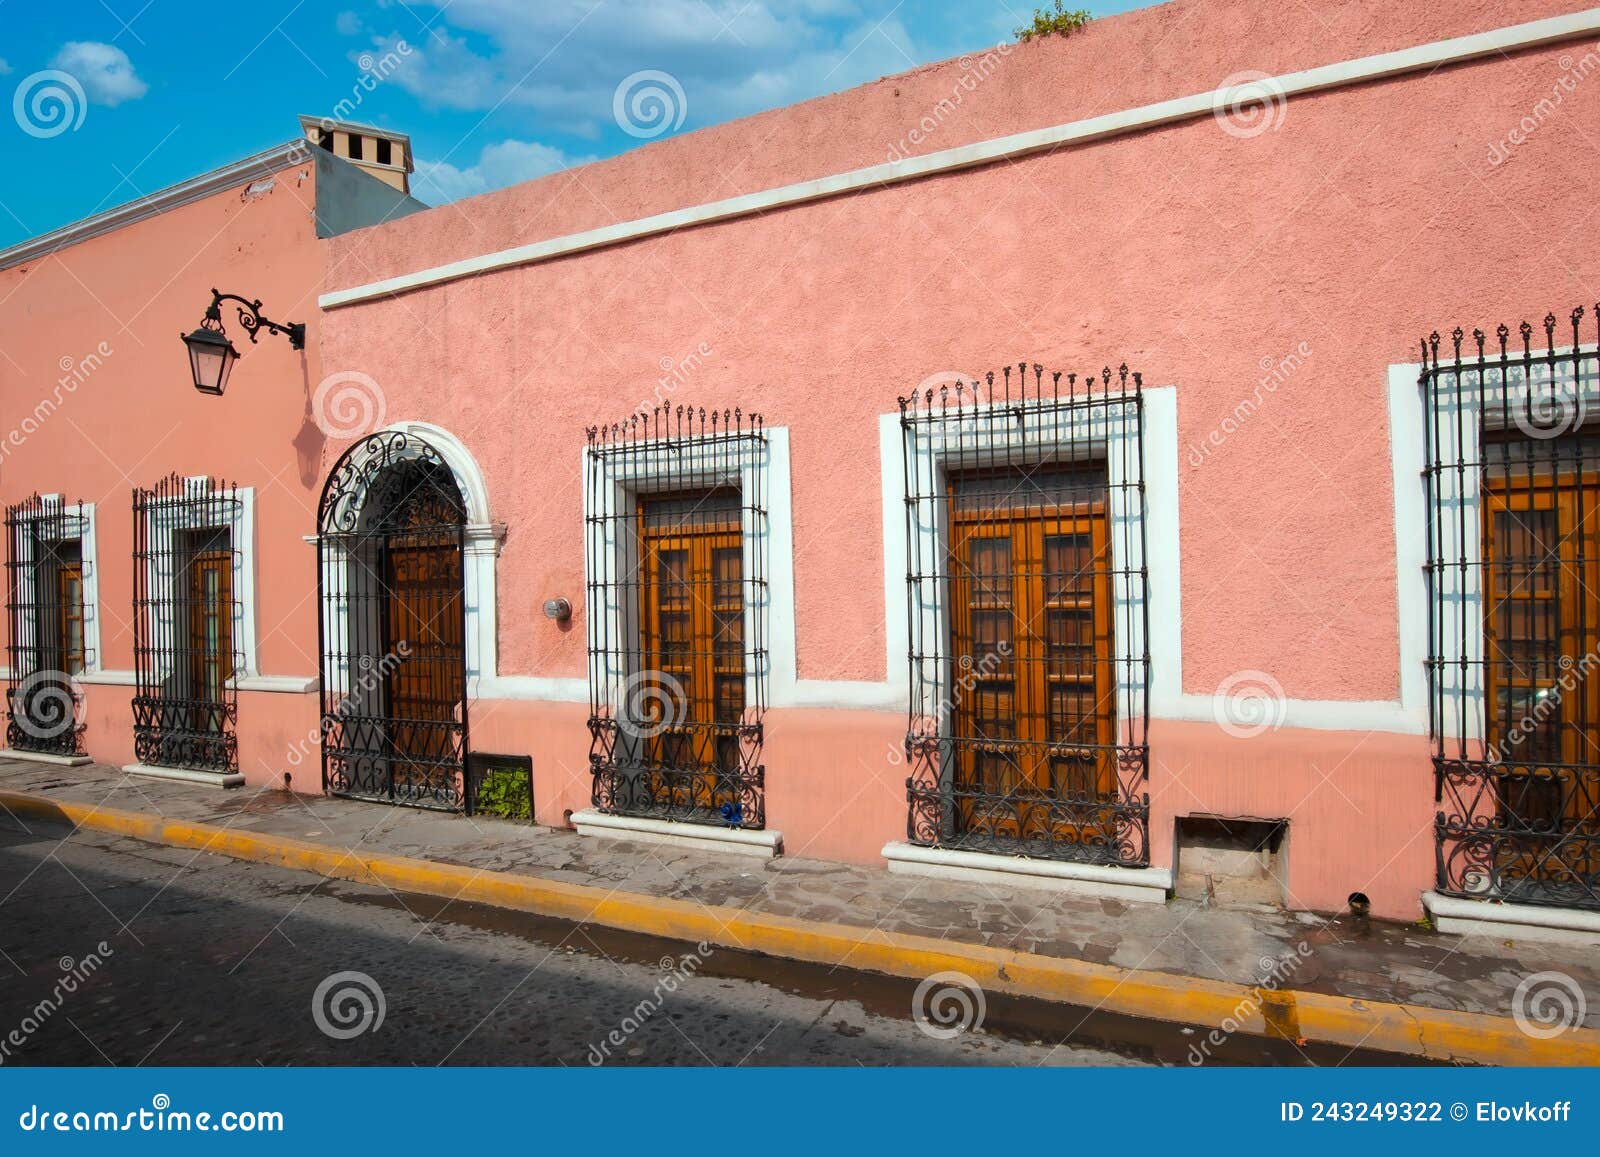 mexico, monterrey, colorful historic houses in barrio antiguo, a famous tourist attraction